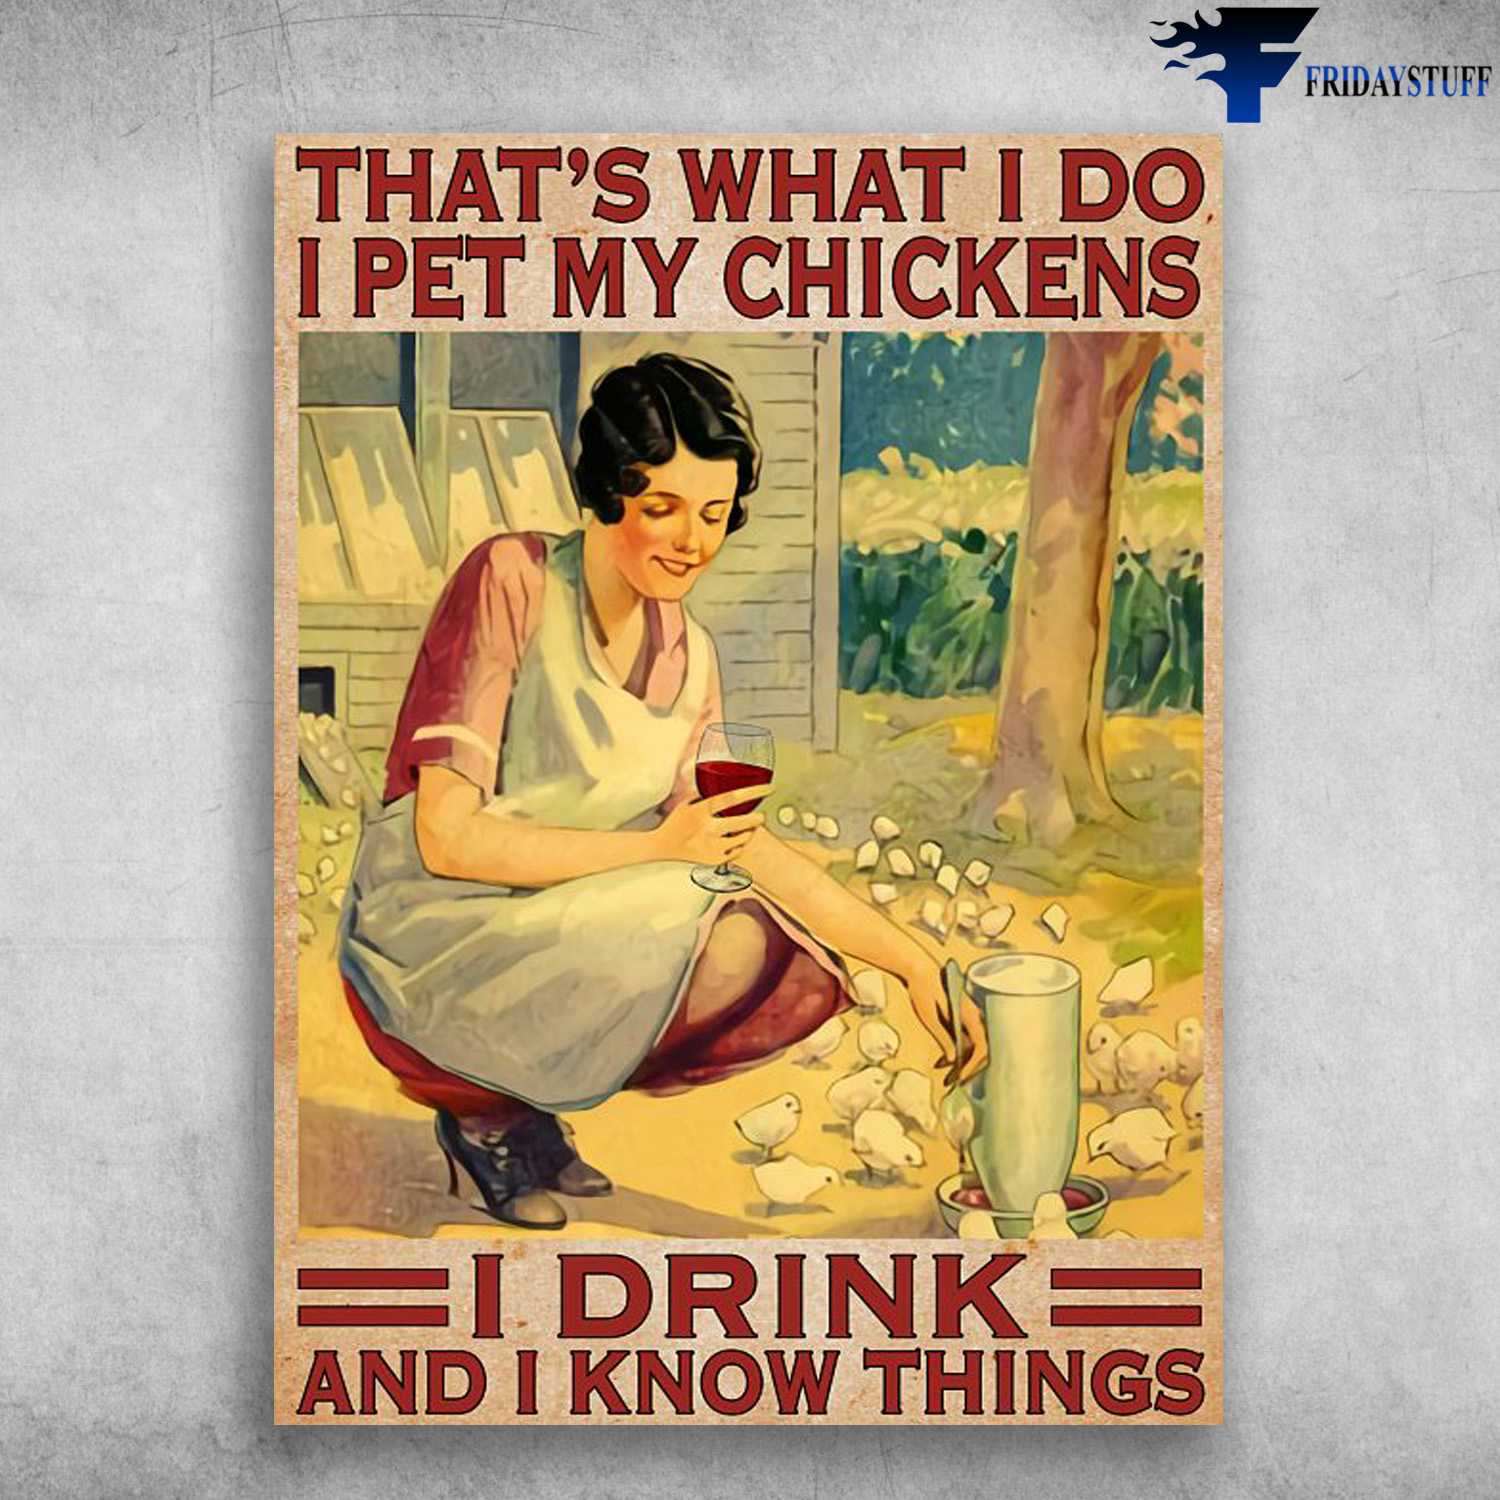 Chicken Breeding, Chicken Lover, That's What I Do, I Pet My Chickens, I Drink, And I Know Things